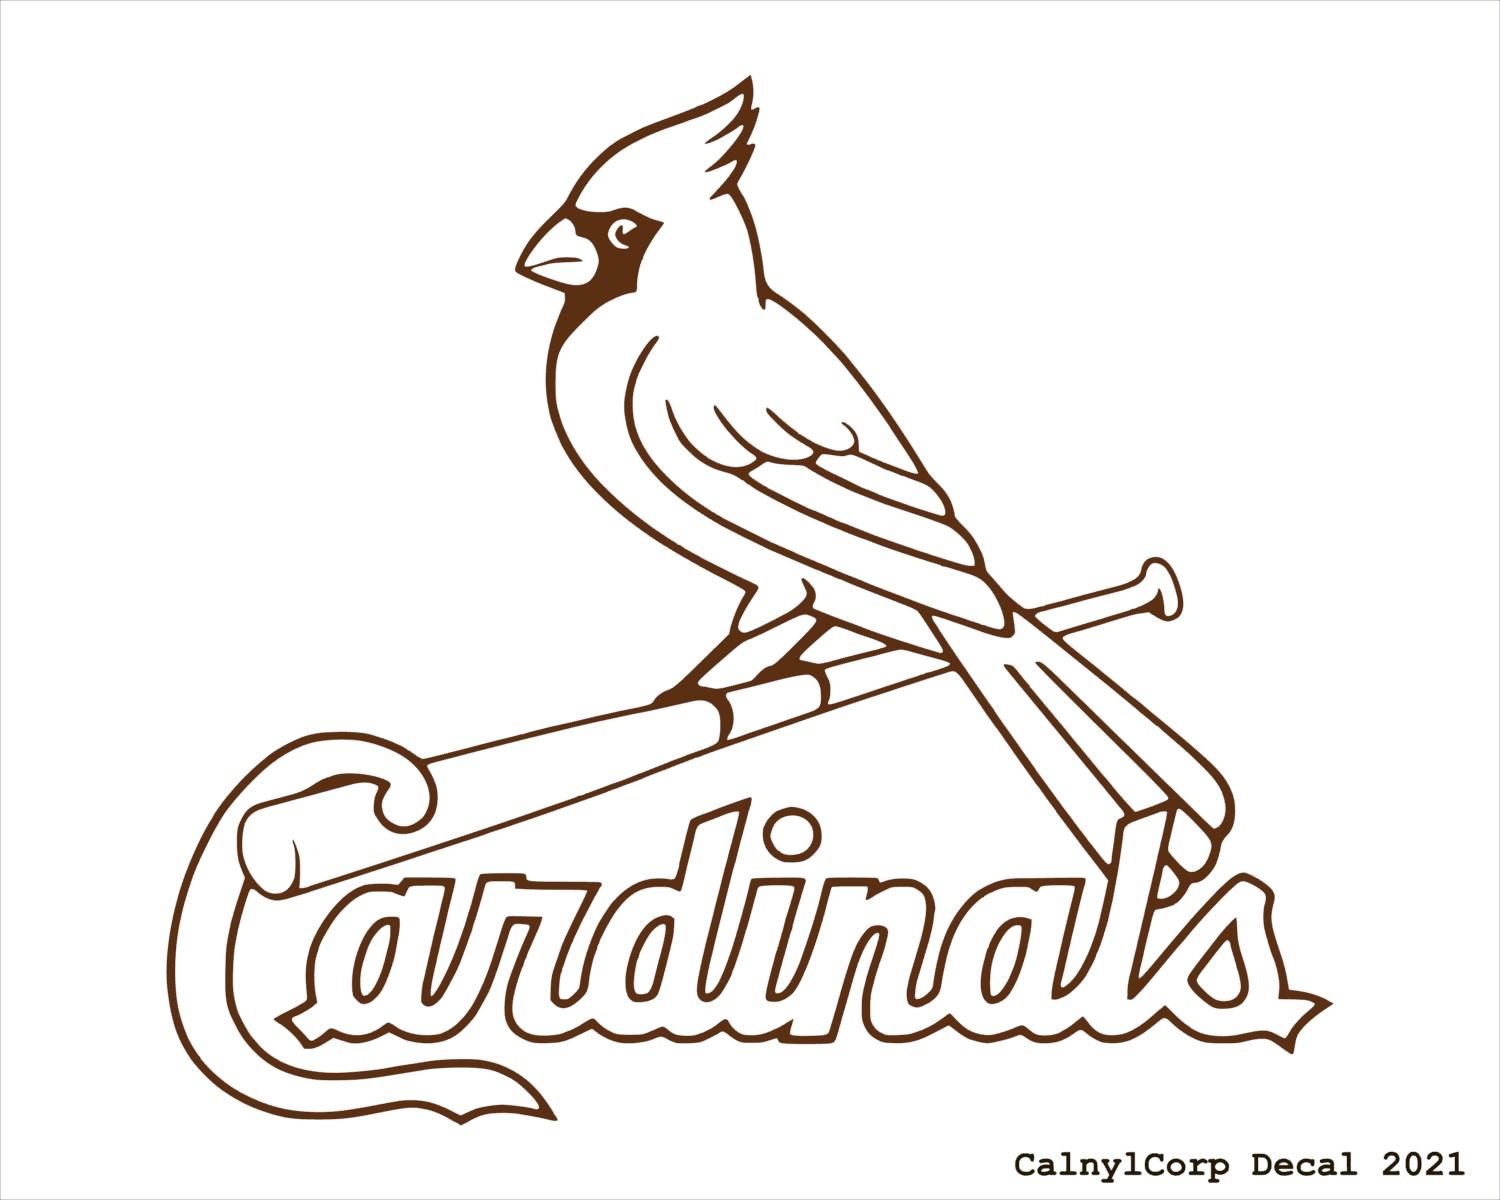 st louis cardinals logo black and white